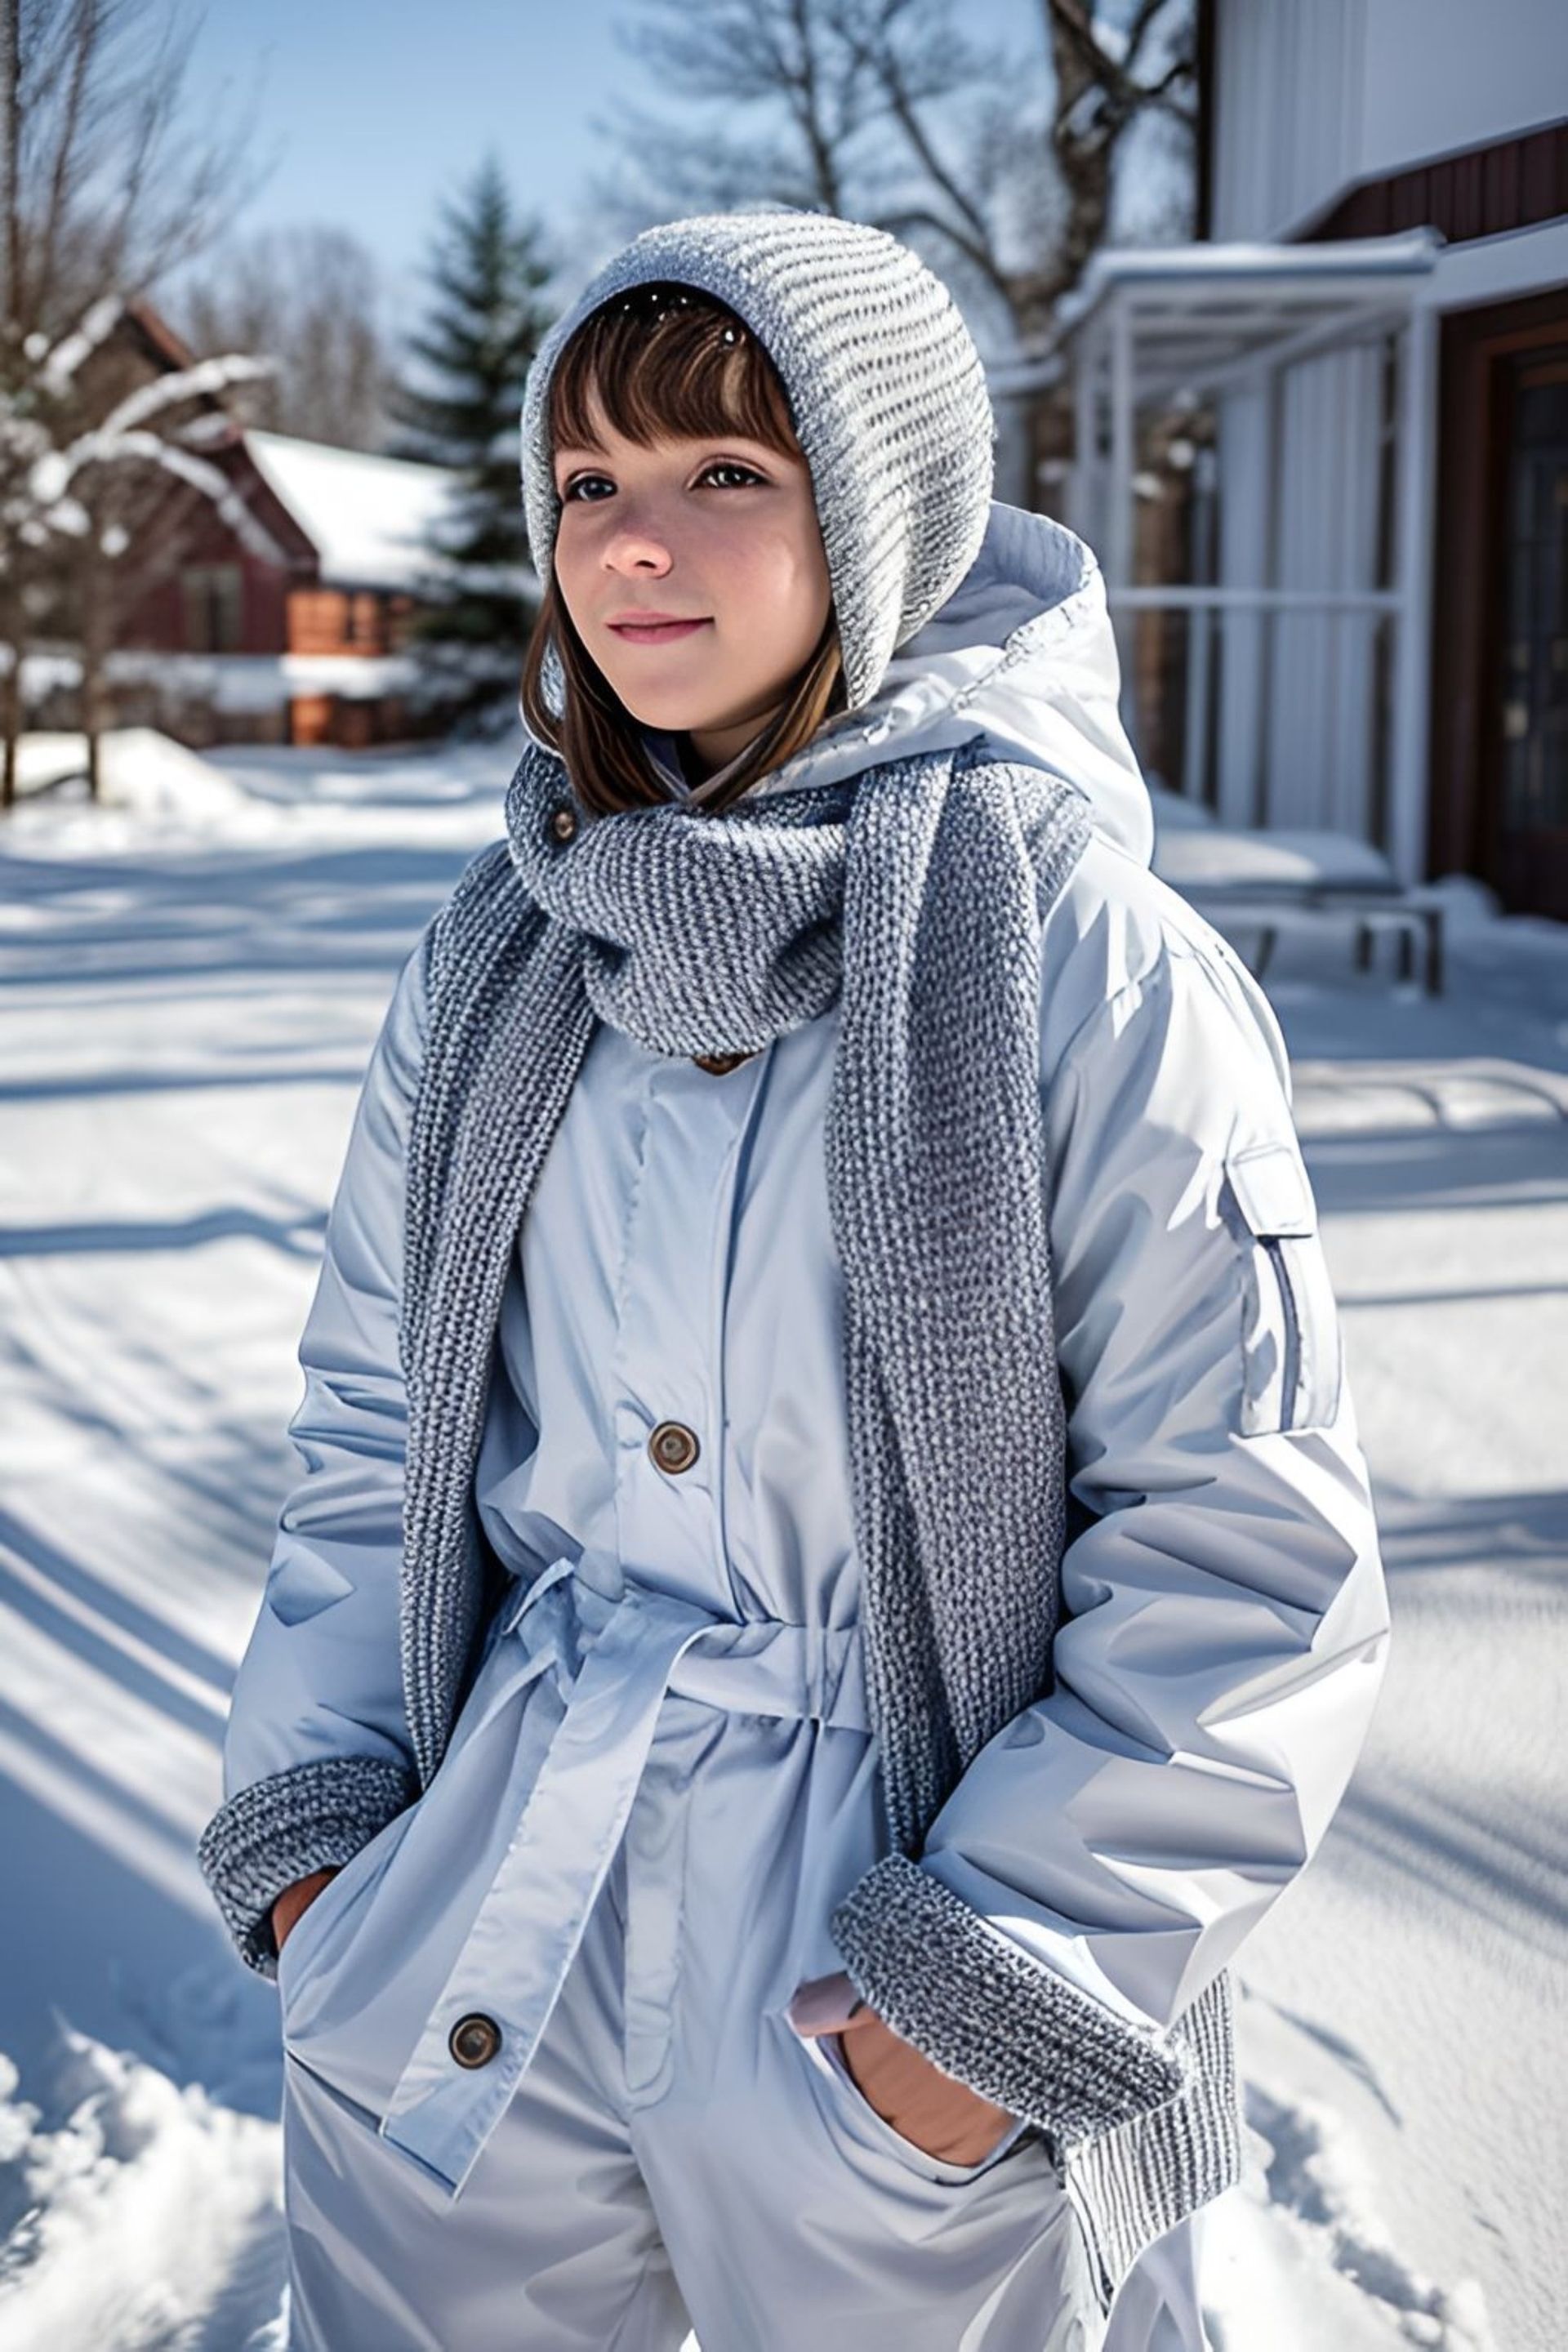 A girl in a winter suit